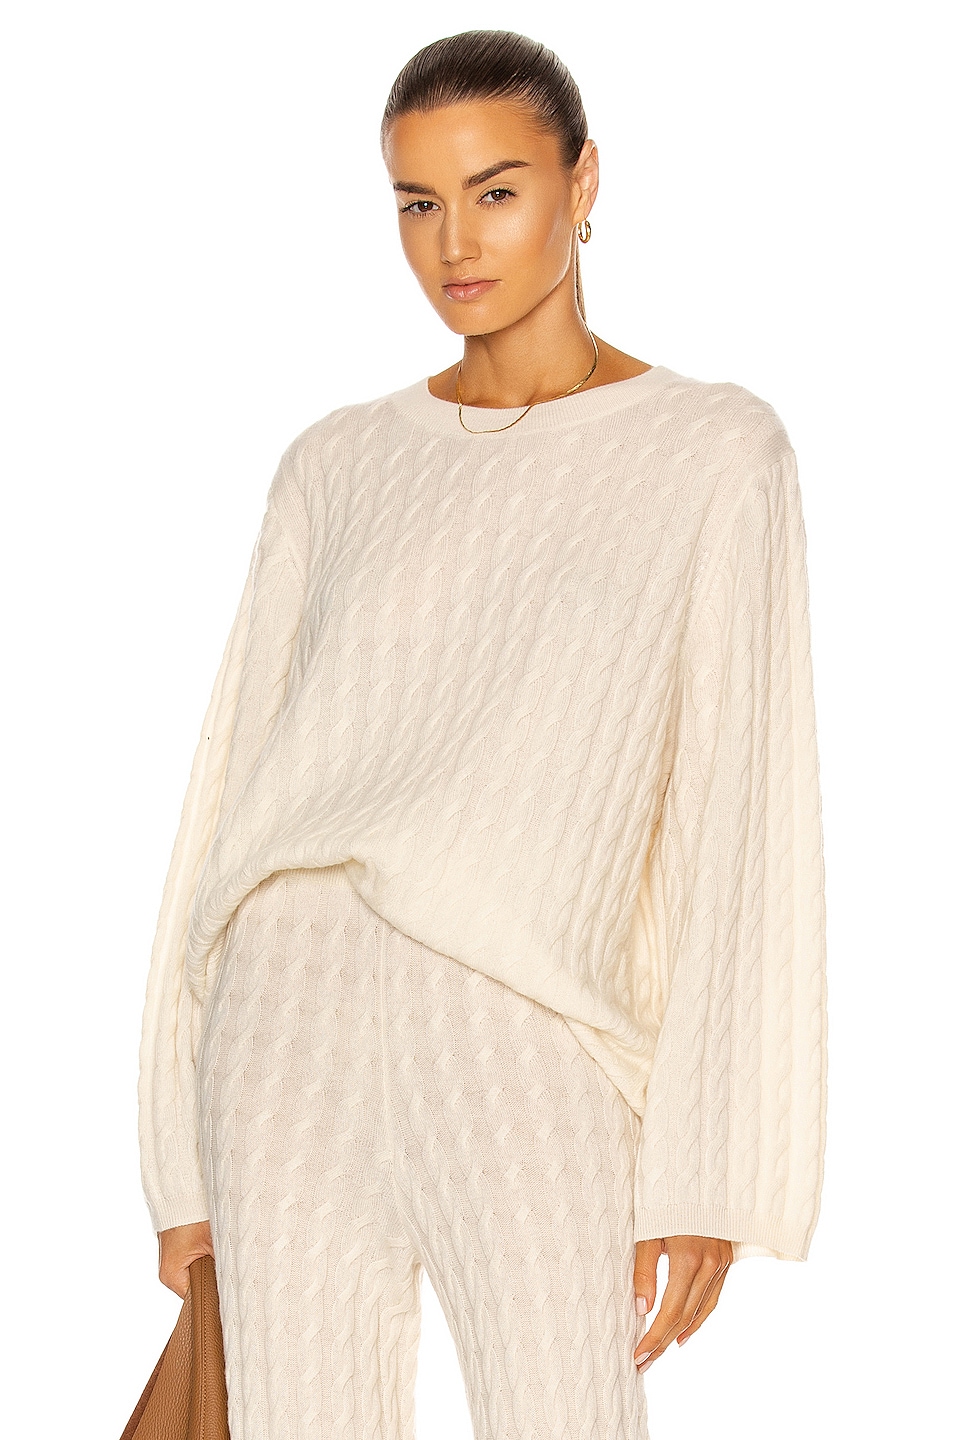 Toteme Cashmere Cable Knit Sweater in Off-White | FWRD